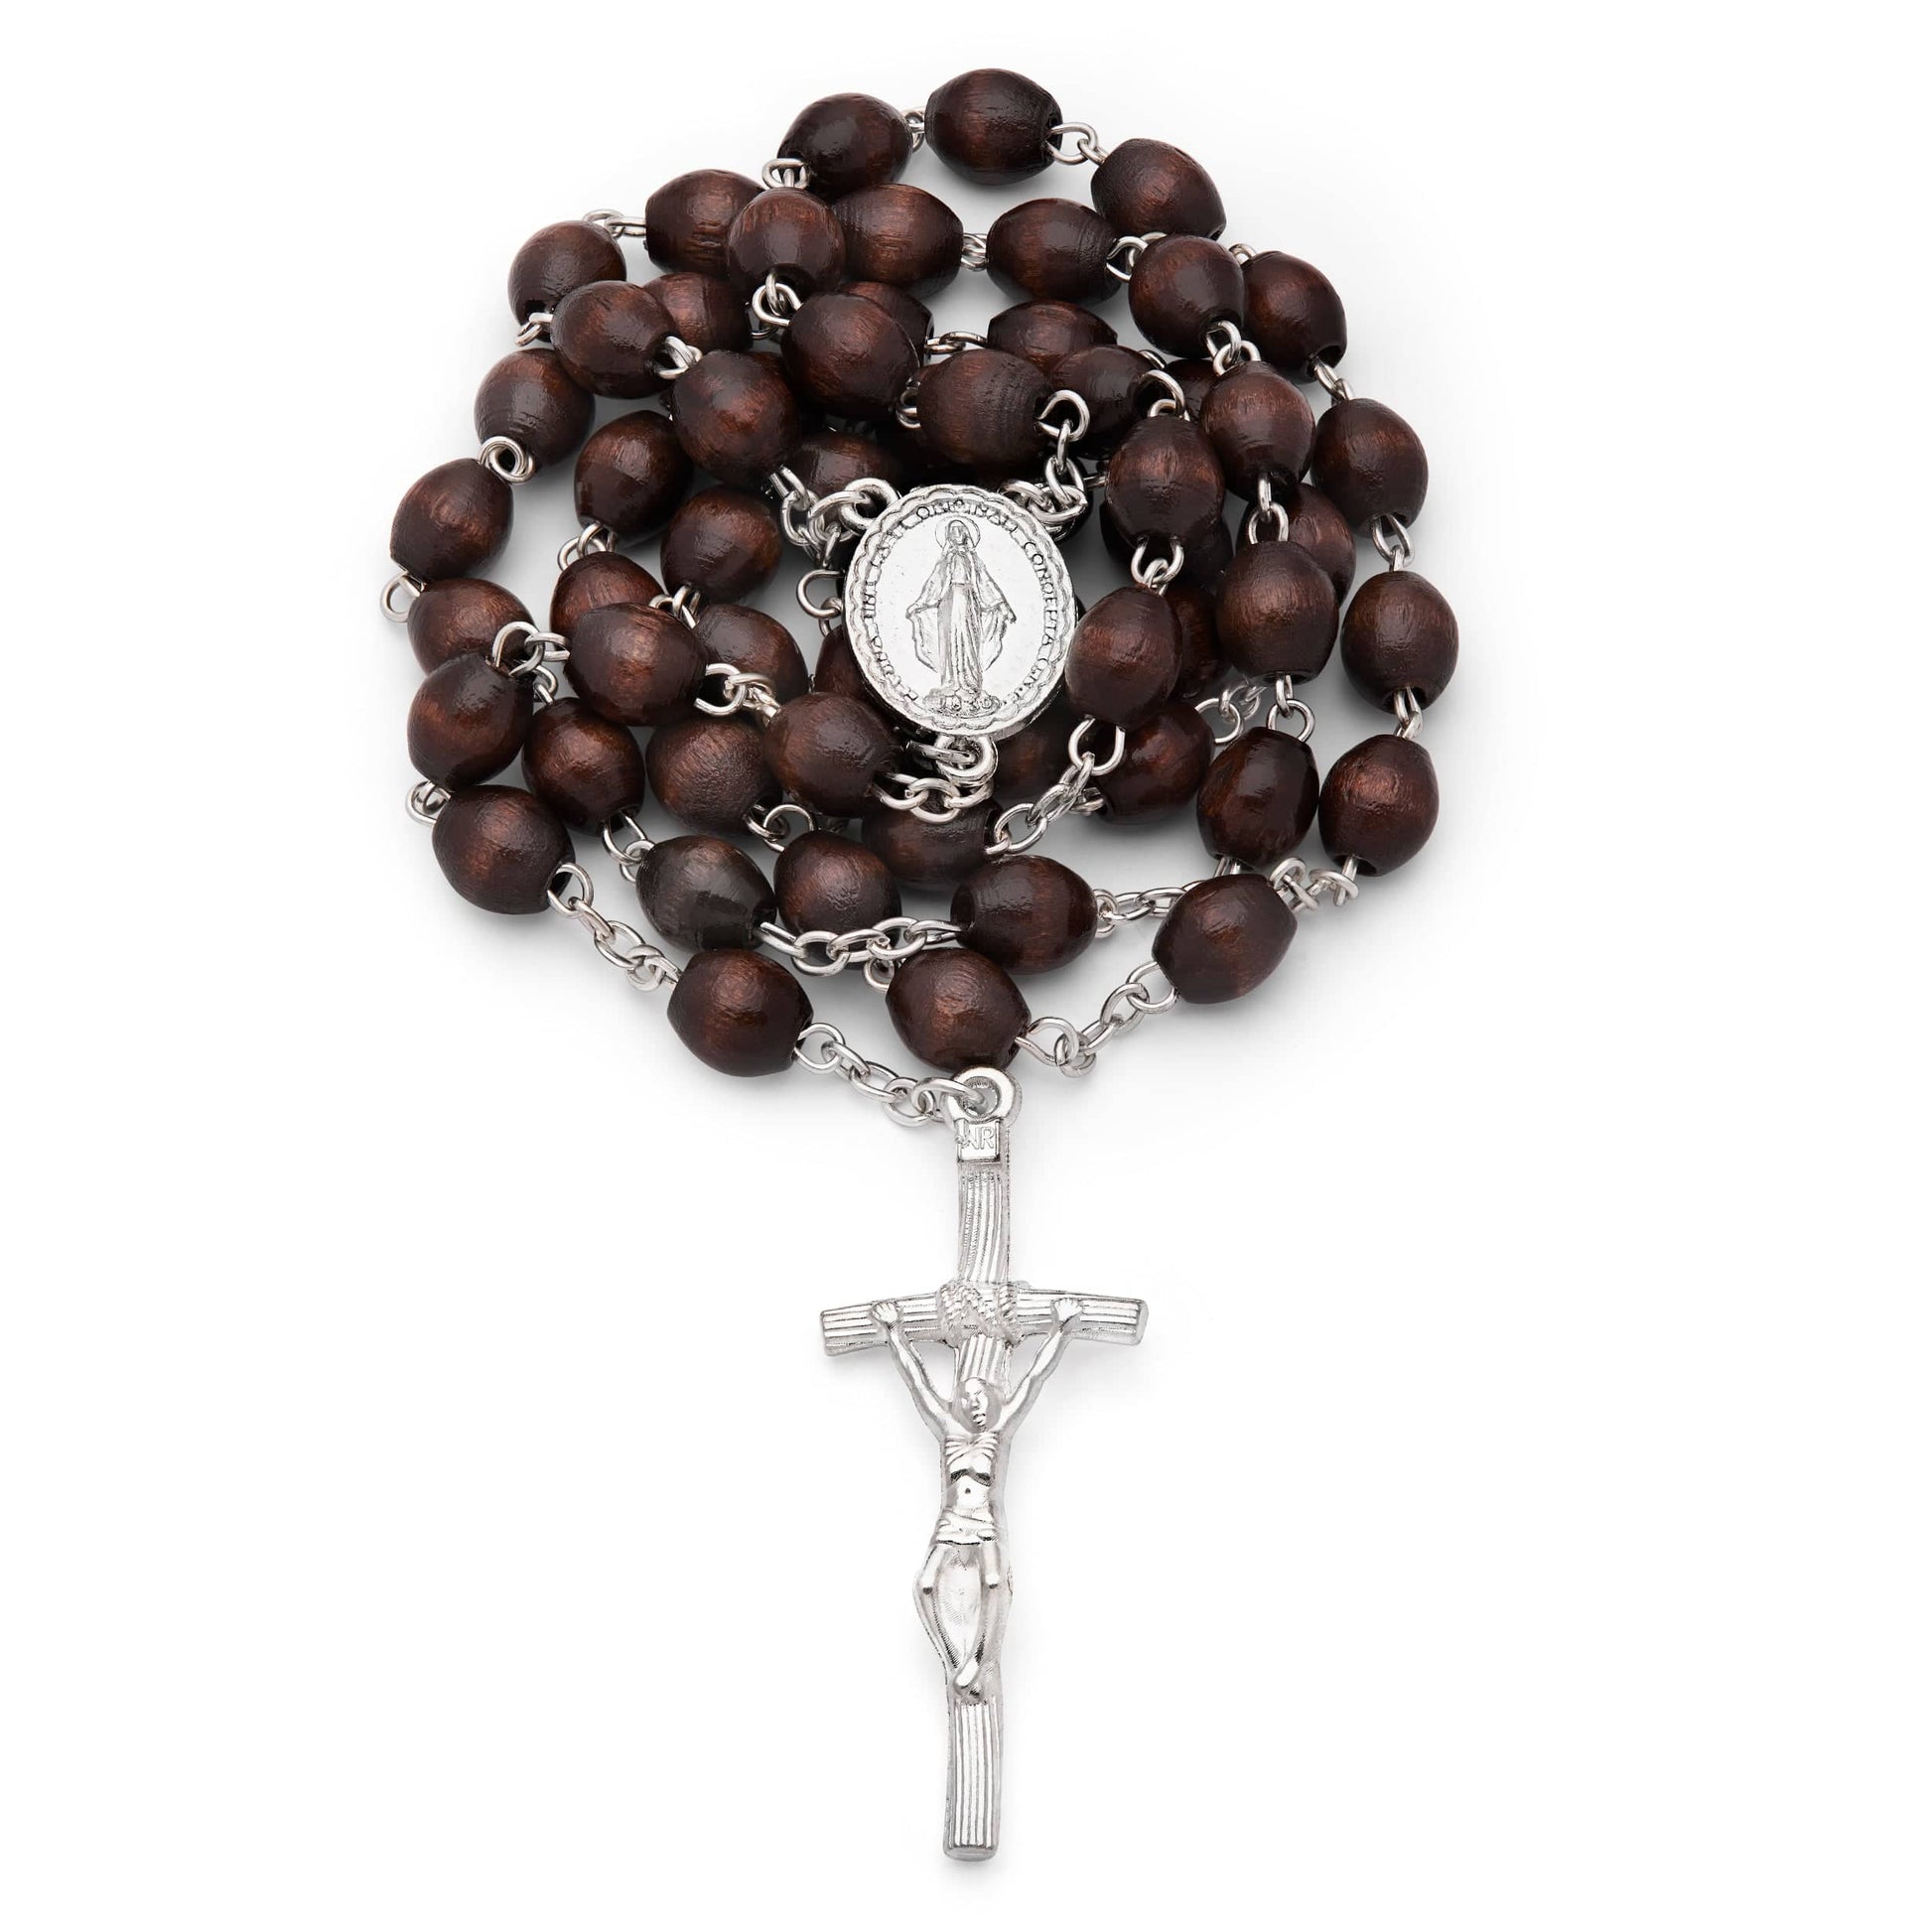 MONDO CATTOLICO Prayer Beads 53 cm (20.90 in) / 7 mm (0.30 in) Holy Family Brown Case and Rosary